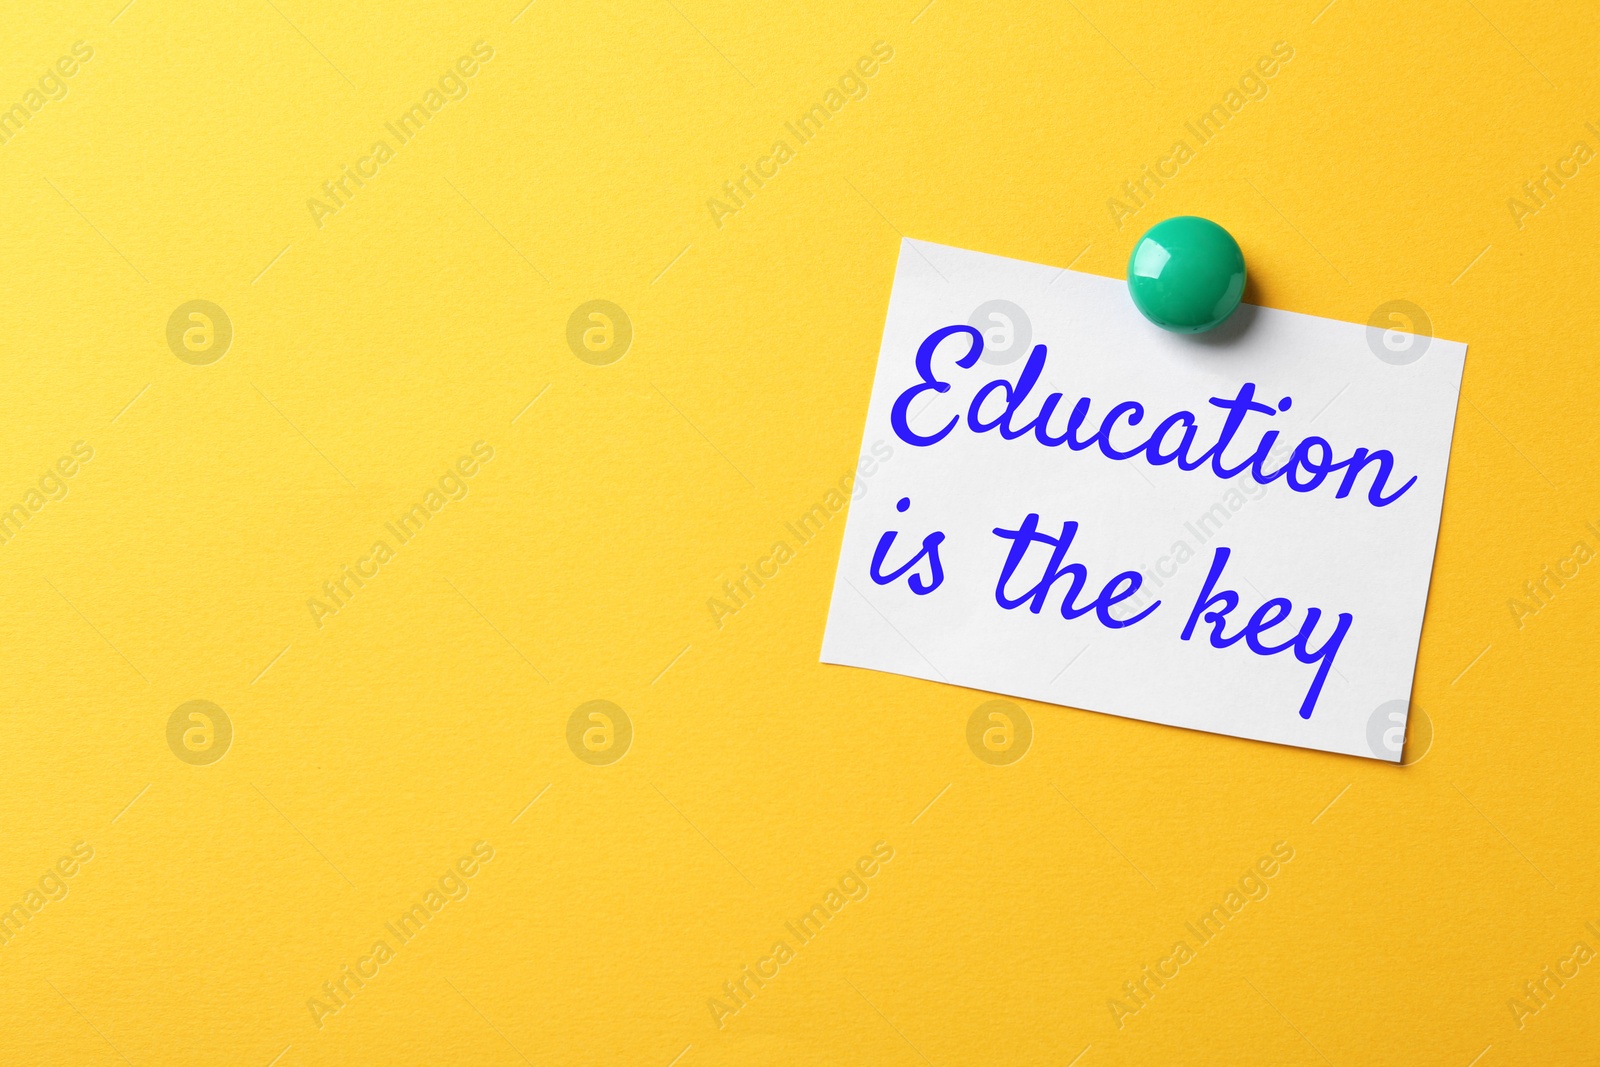 Image of Paper note with text Education is the key on yellow background. Adult learning